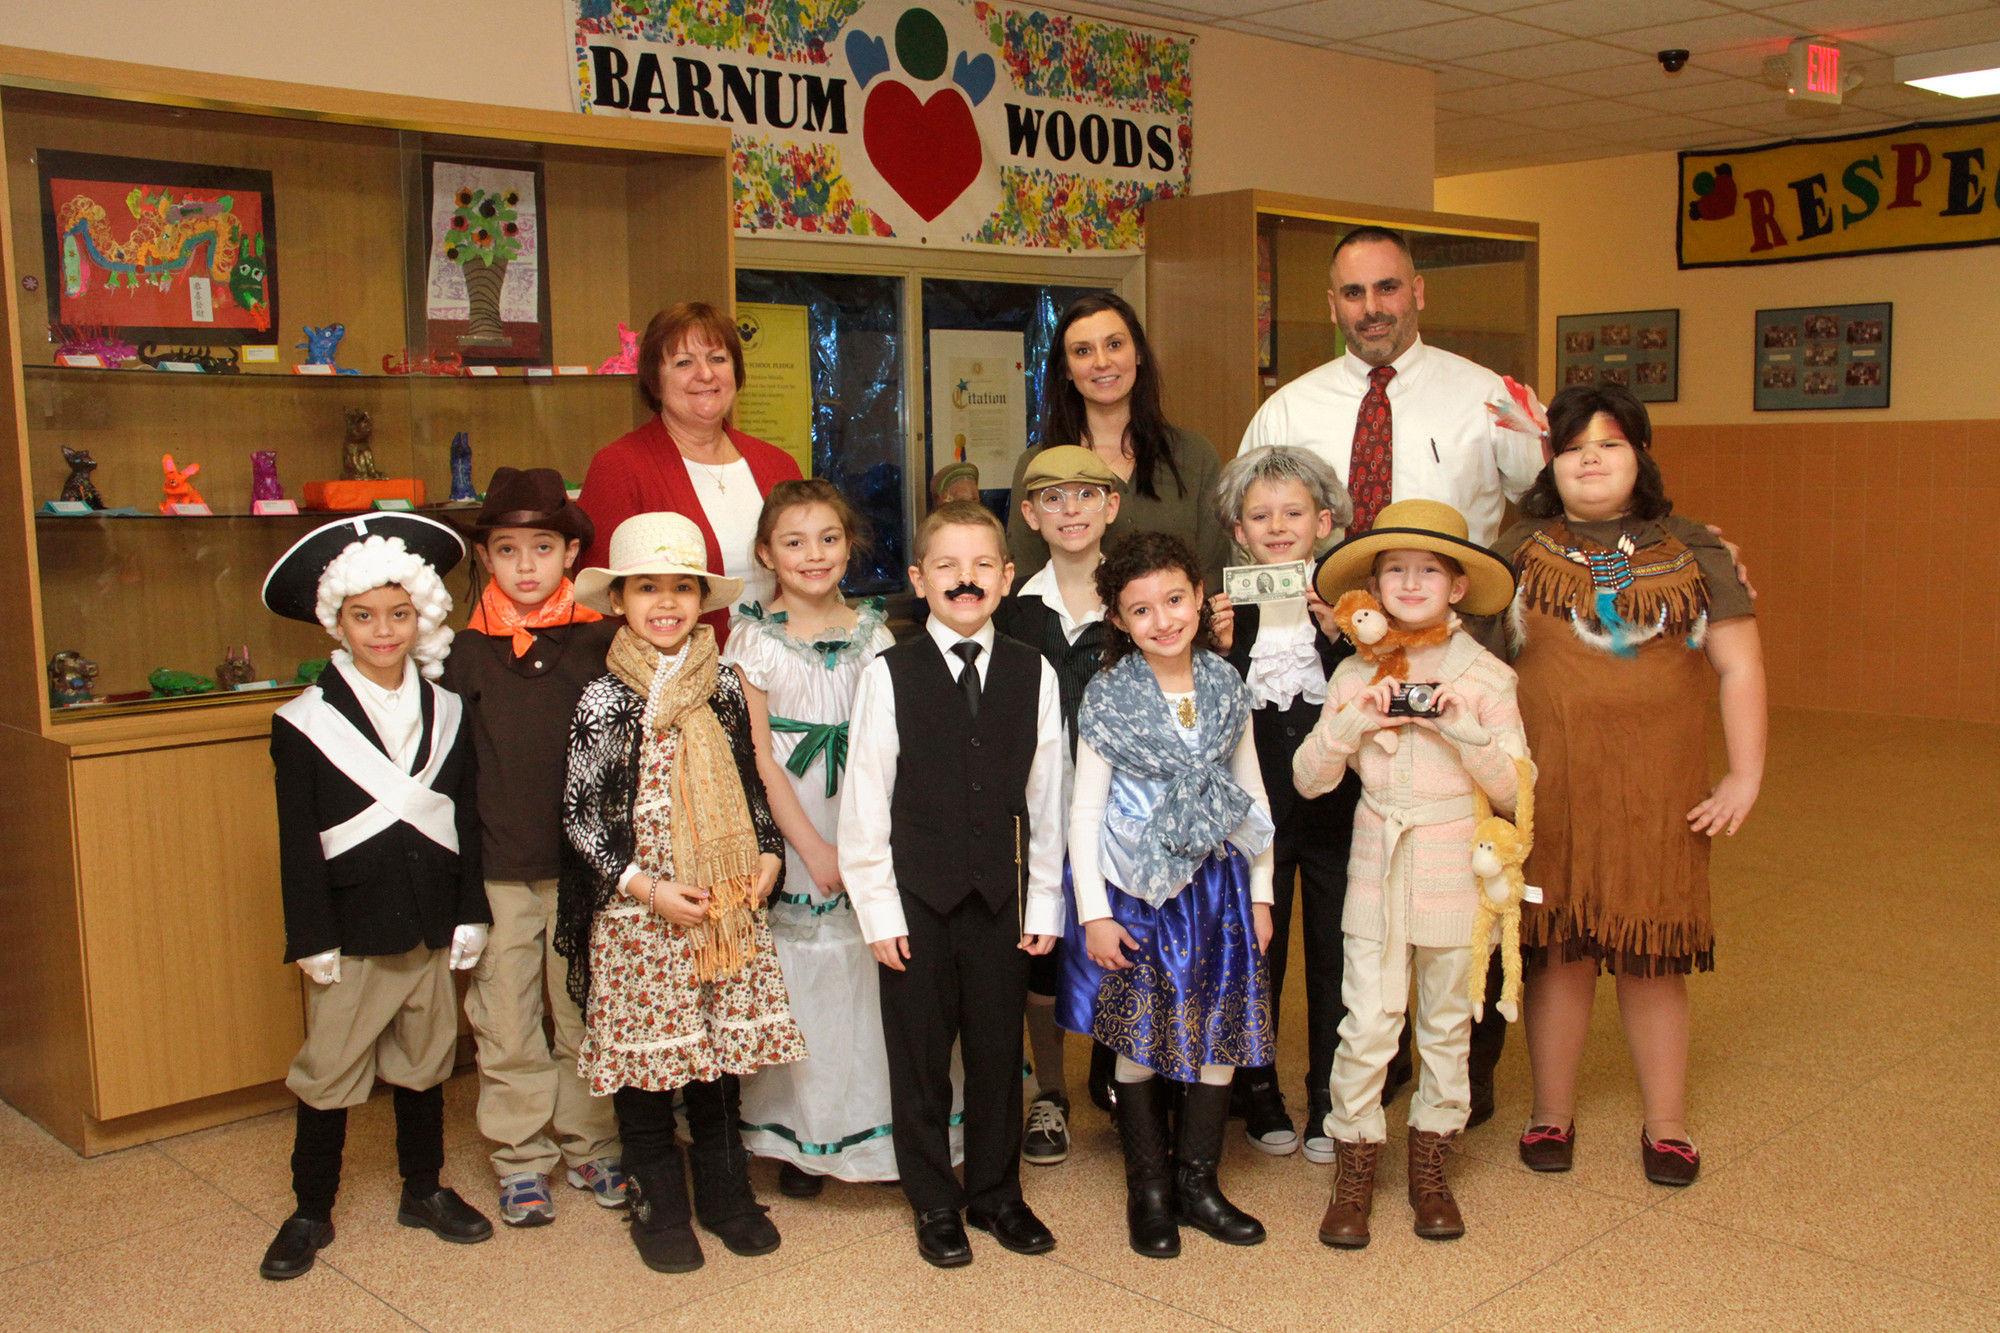 While Luke Pamdolfi and Daniel Caliguirre, far left, chose to dress like George Washington and Teddy Roosevelt in advance of Presidents Day, Barnum Woods Elementary students donned an assortment of costumes at the Famous Americans Parade on Feb. 10.